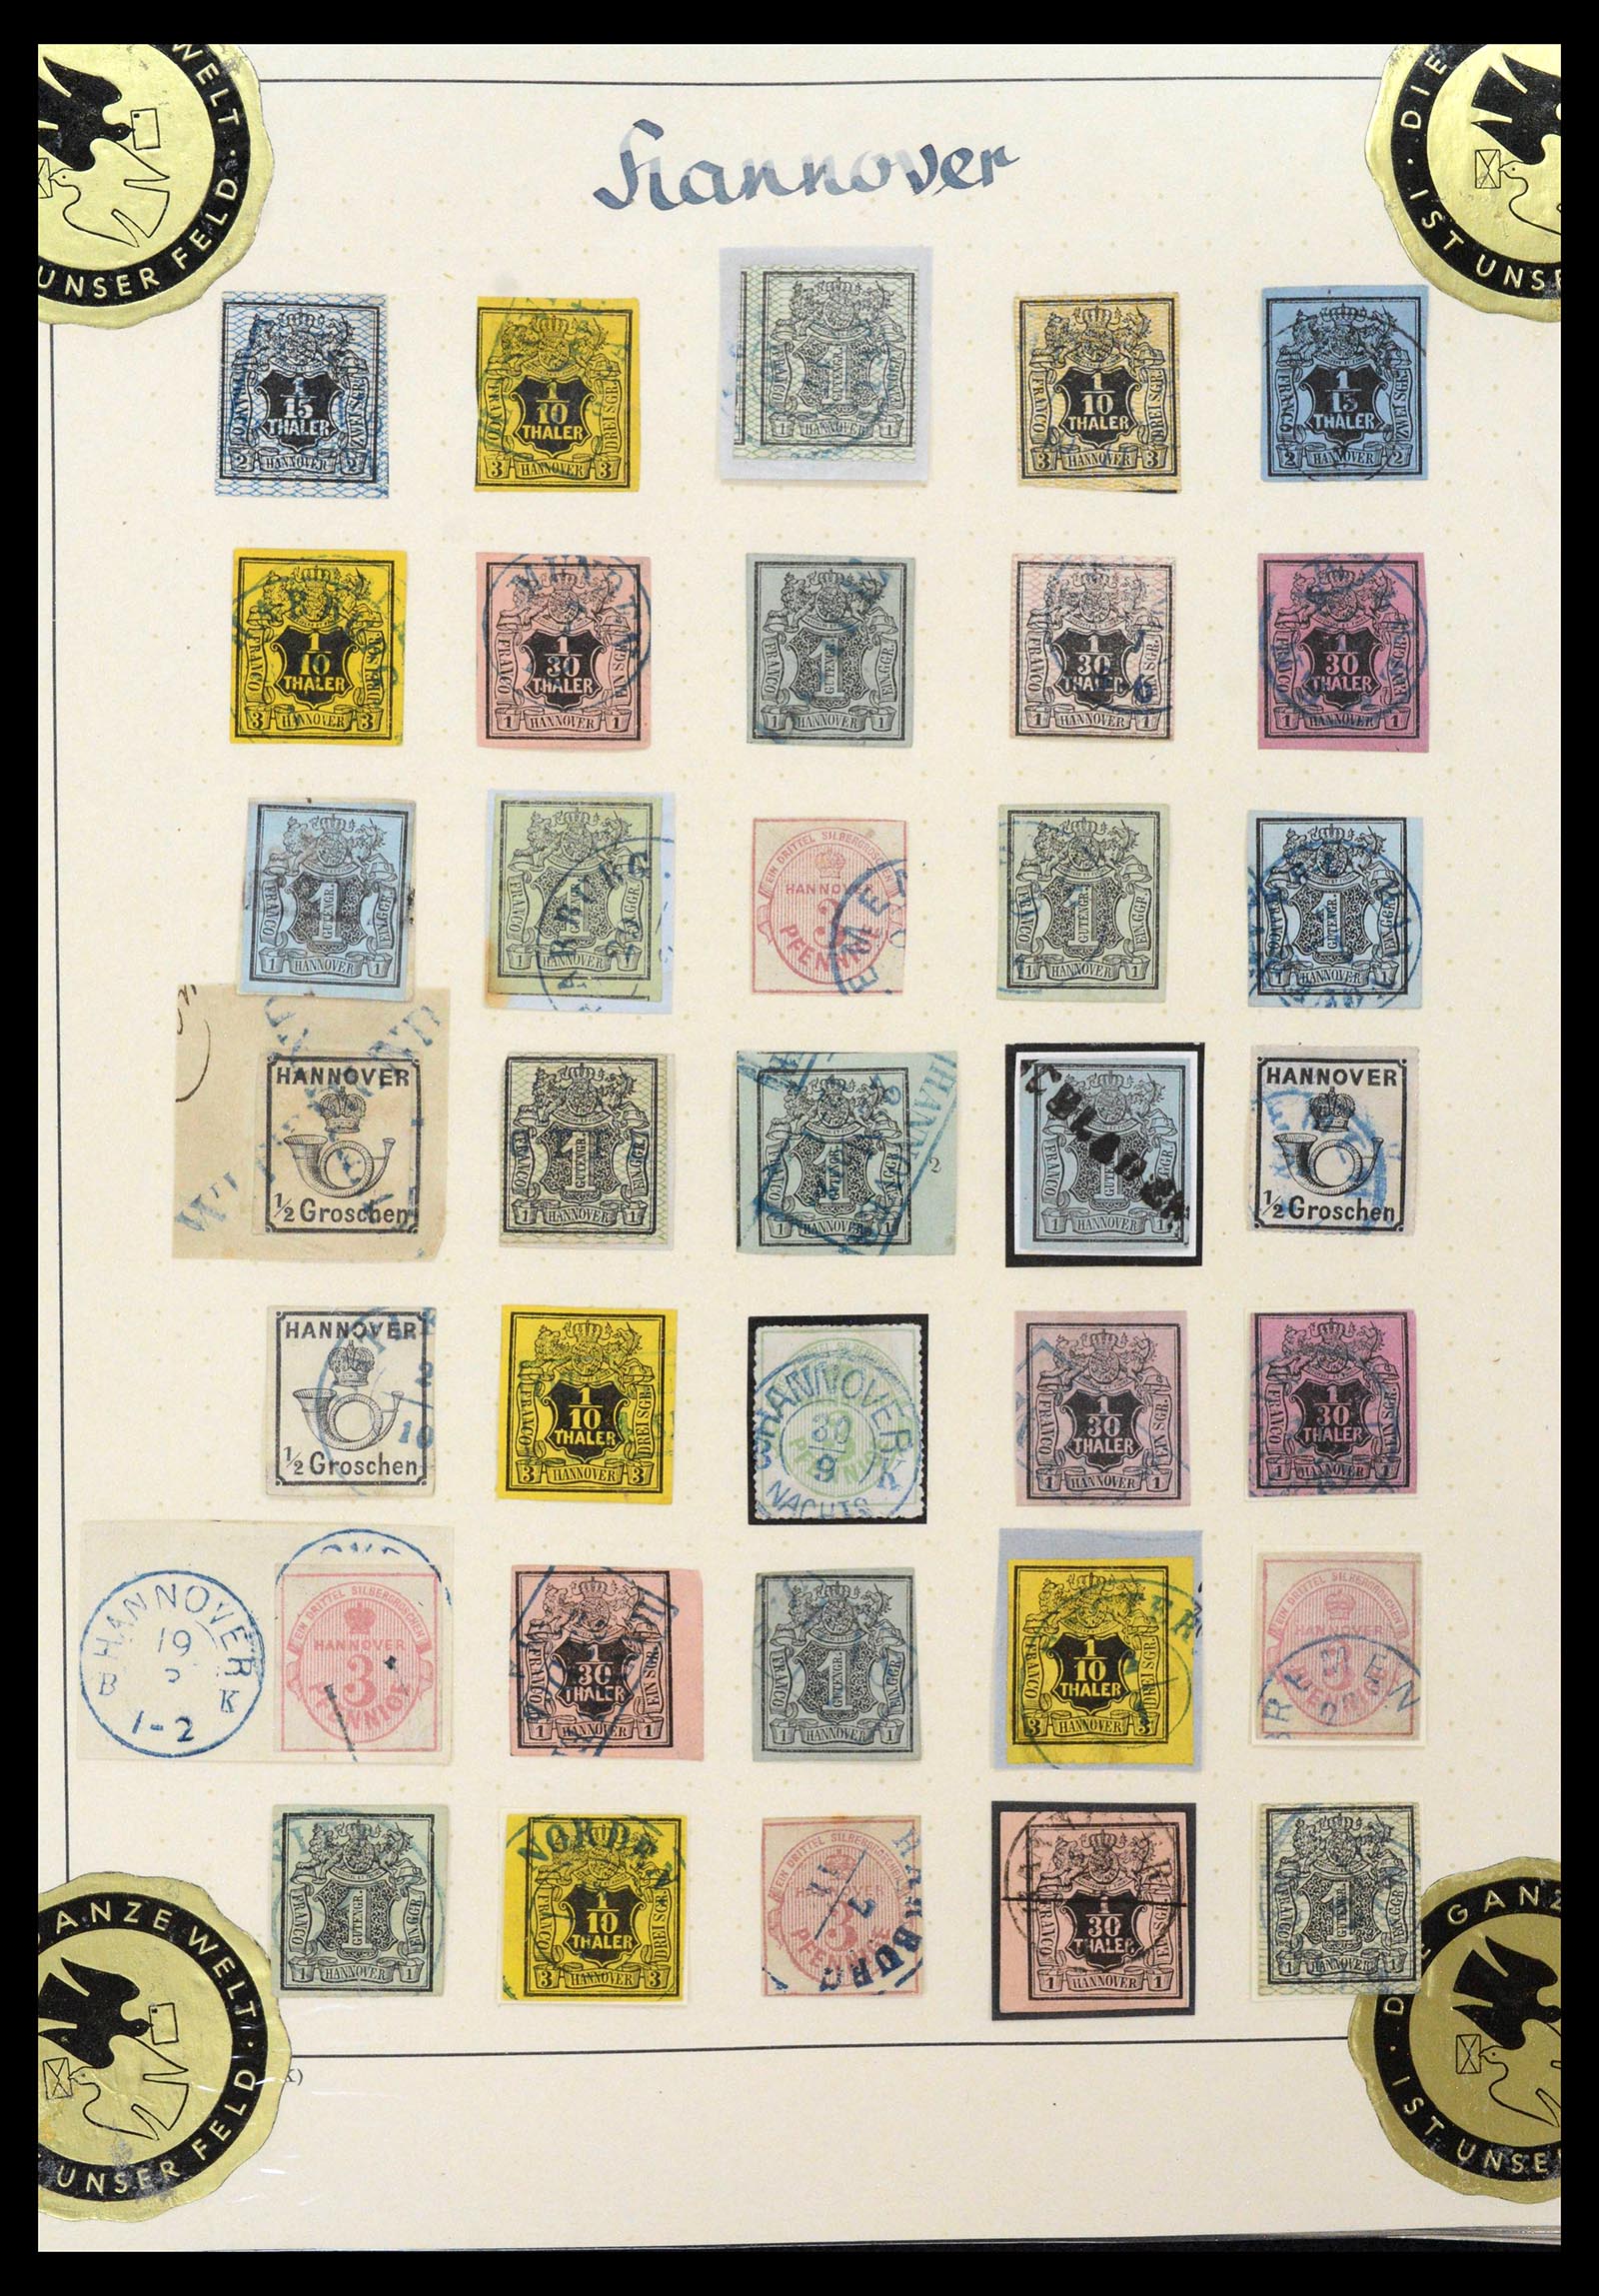 39200 0005 - Stamp collection 39200 Hannover SUPER collection 1850-1864.